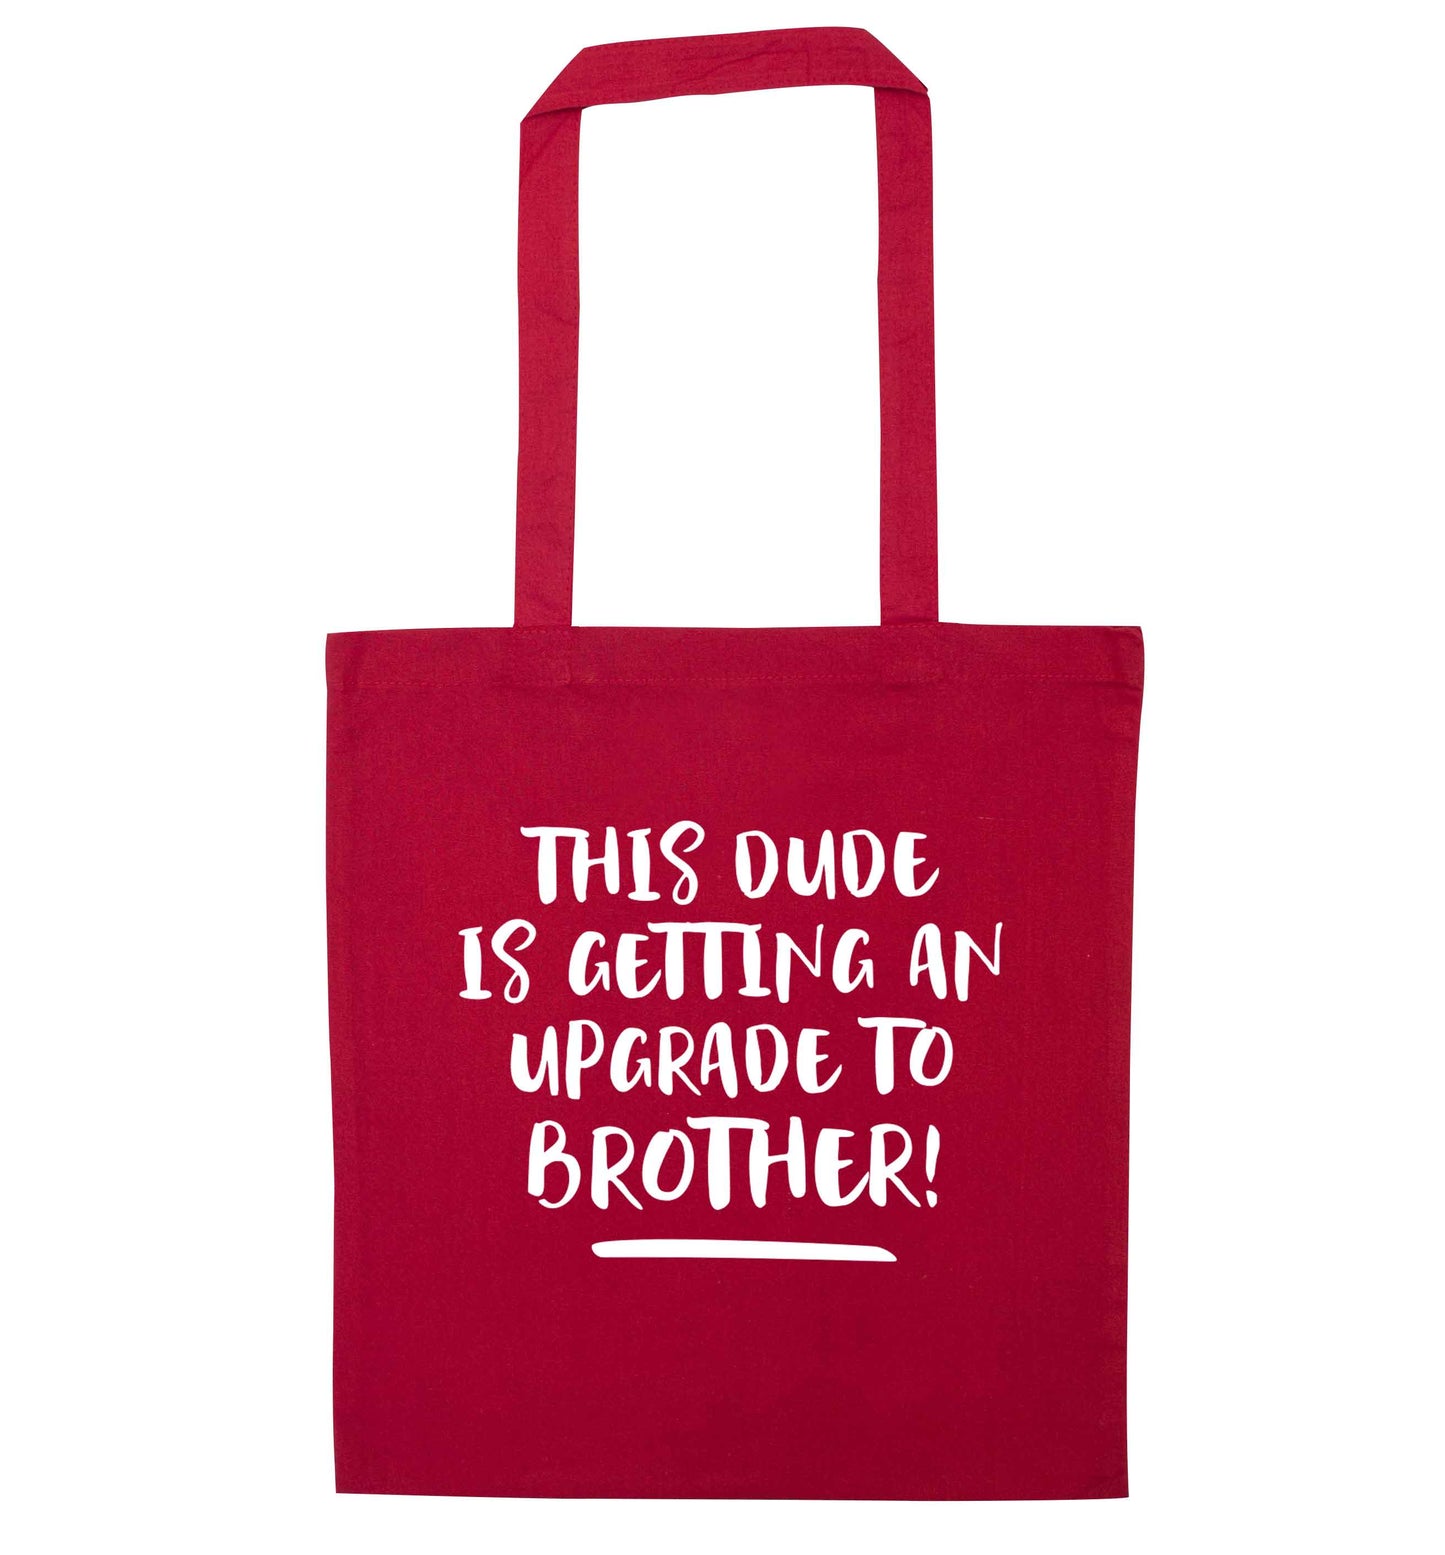 This dude is getting an upgrade to brother! red tote bag